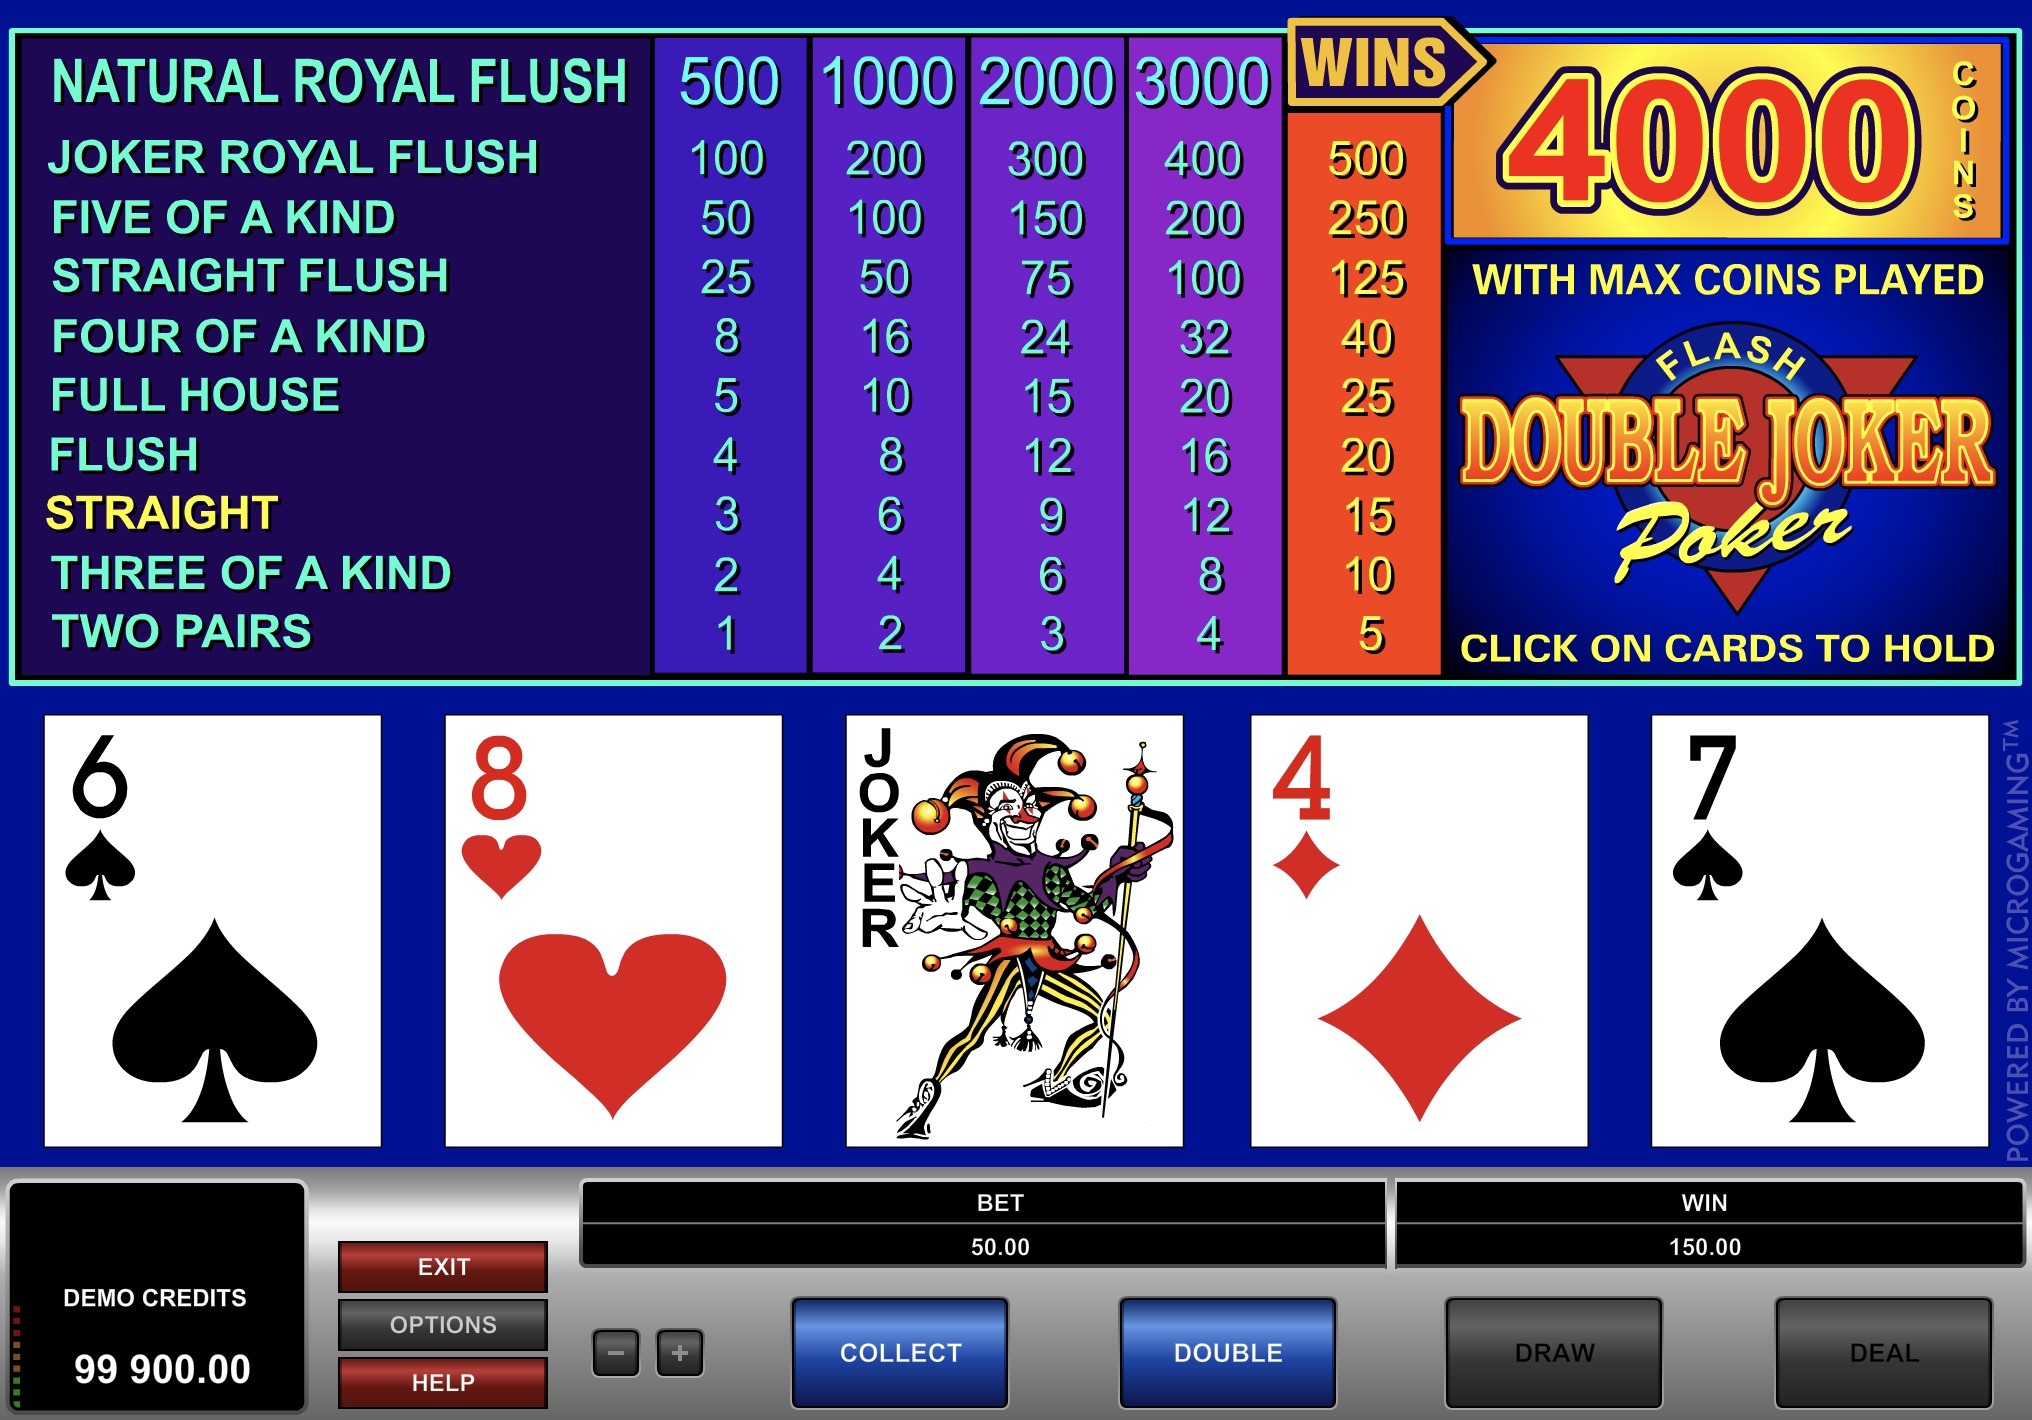 Double Joker Poker is one of the most recent additions to the video poker categories at the leading Microgaming online casinos and sees players having not one but two opportunities to fill in the gaps in their winning combinations thanks to the addition of a second wild card/5(14).